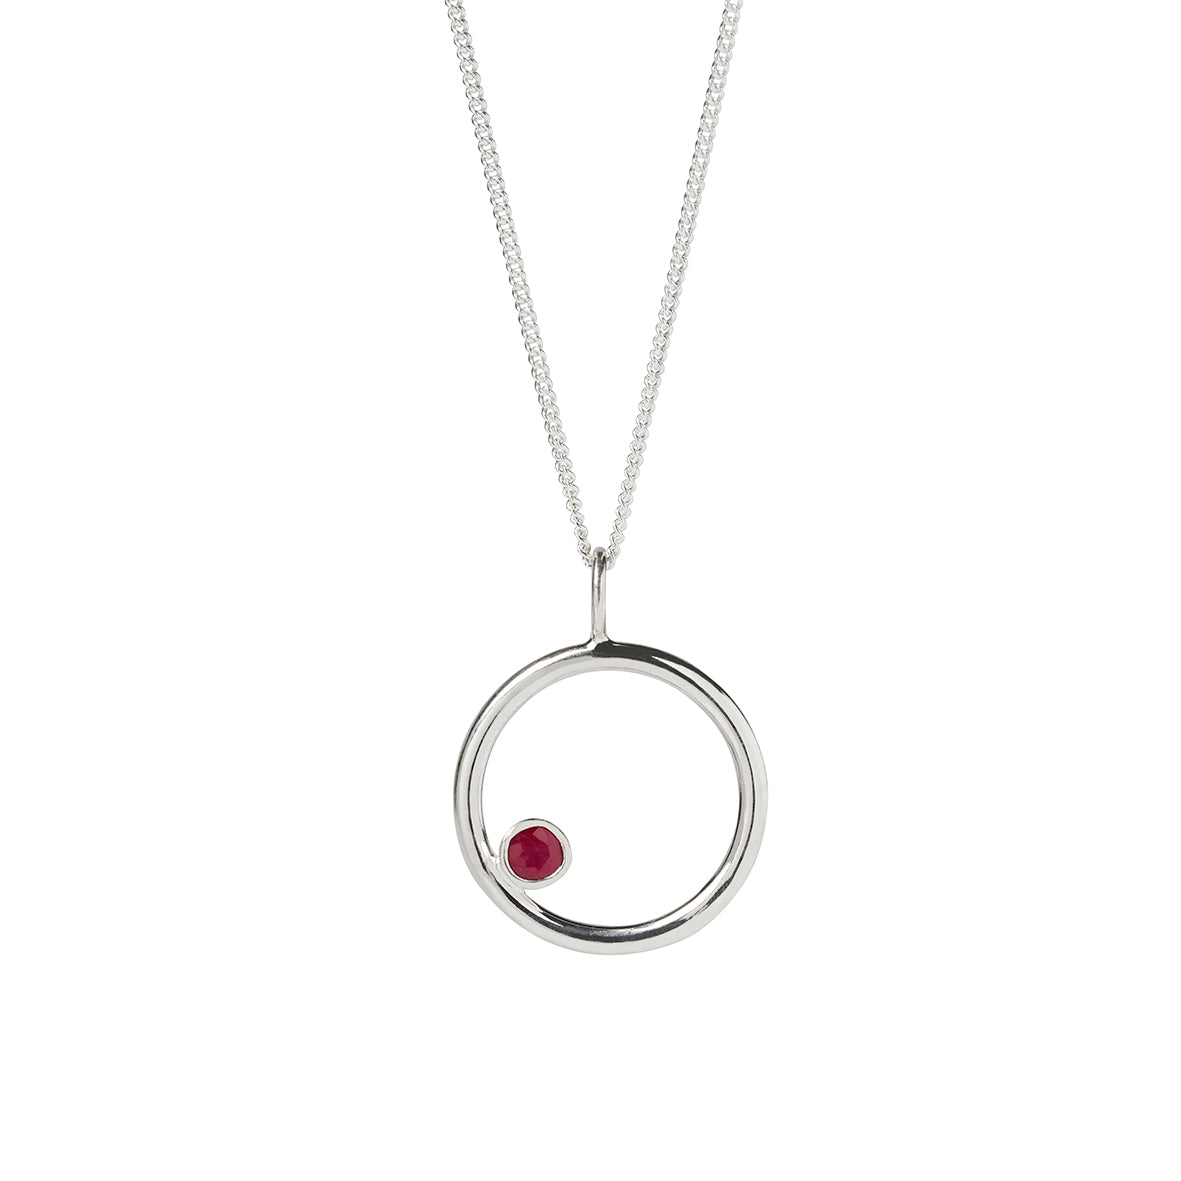 Silver circle pendant with offset bezel set 4mm red Ruby gemstone on a sterling silver curb chain on a white background. Handmade in Kirsty Taylor Goldsmiths in Northumberland